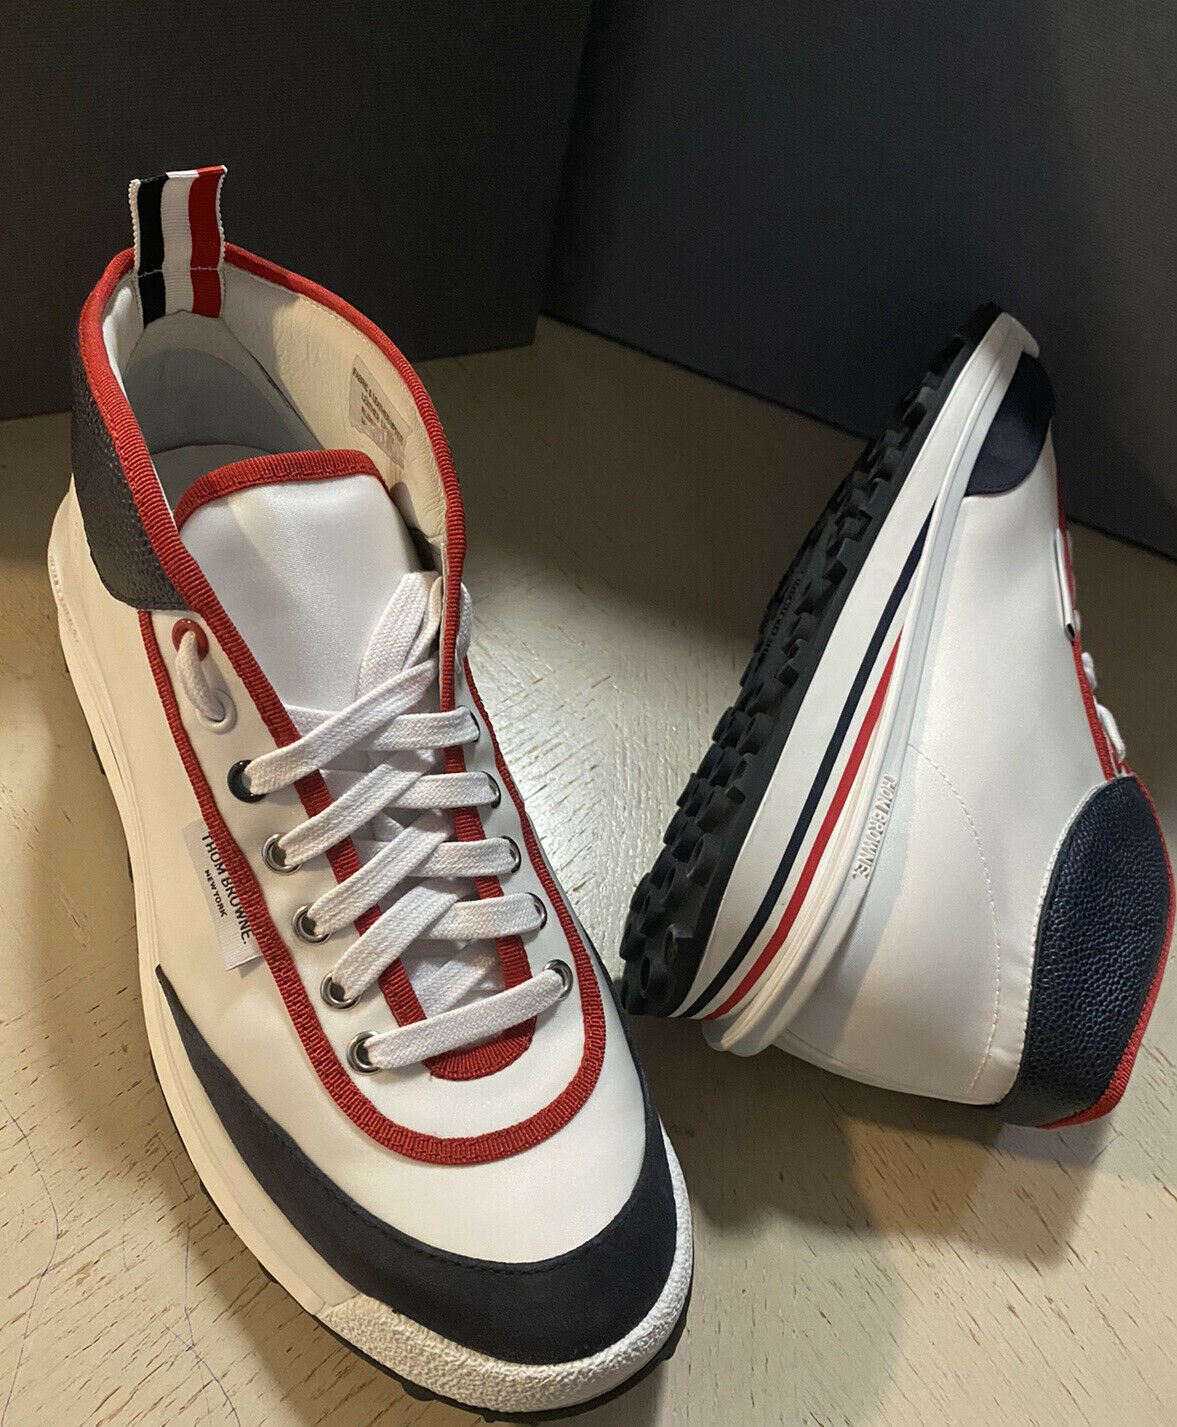 NIB Thom Browne Men Mid-Top Rugby Trainers Sneakers Shoes 8 US / 41 EU